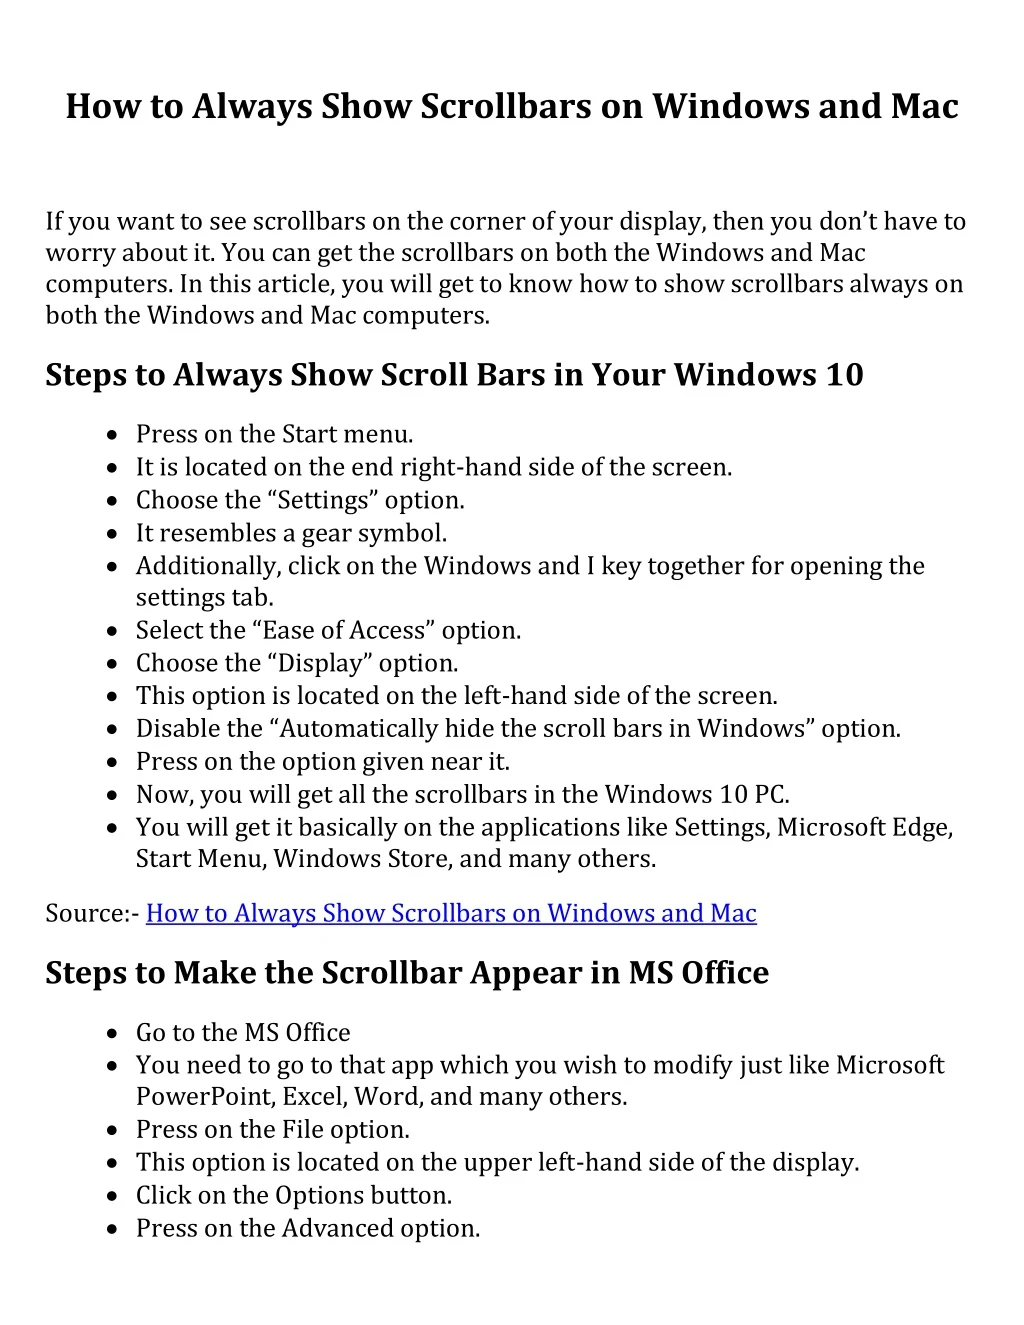 how to always show scrollbars on windows and mac